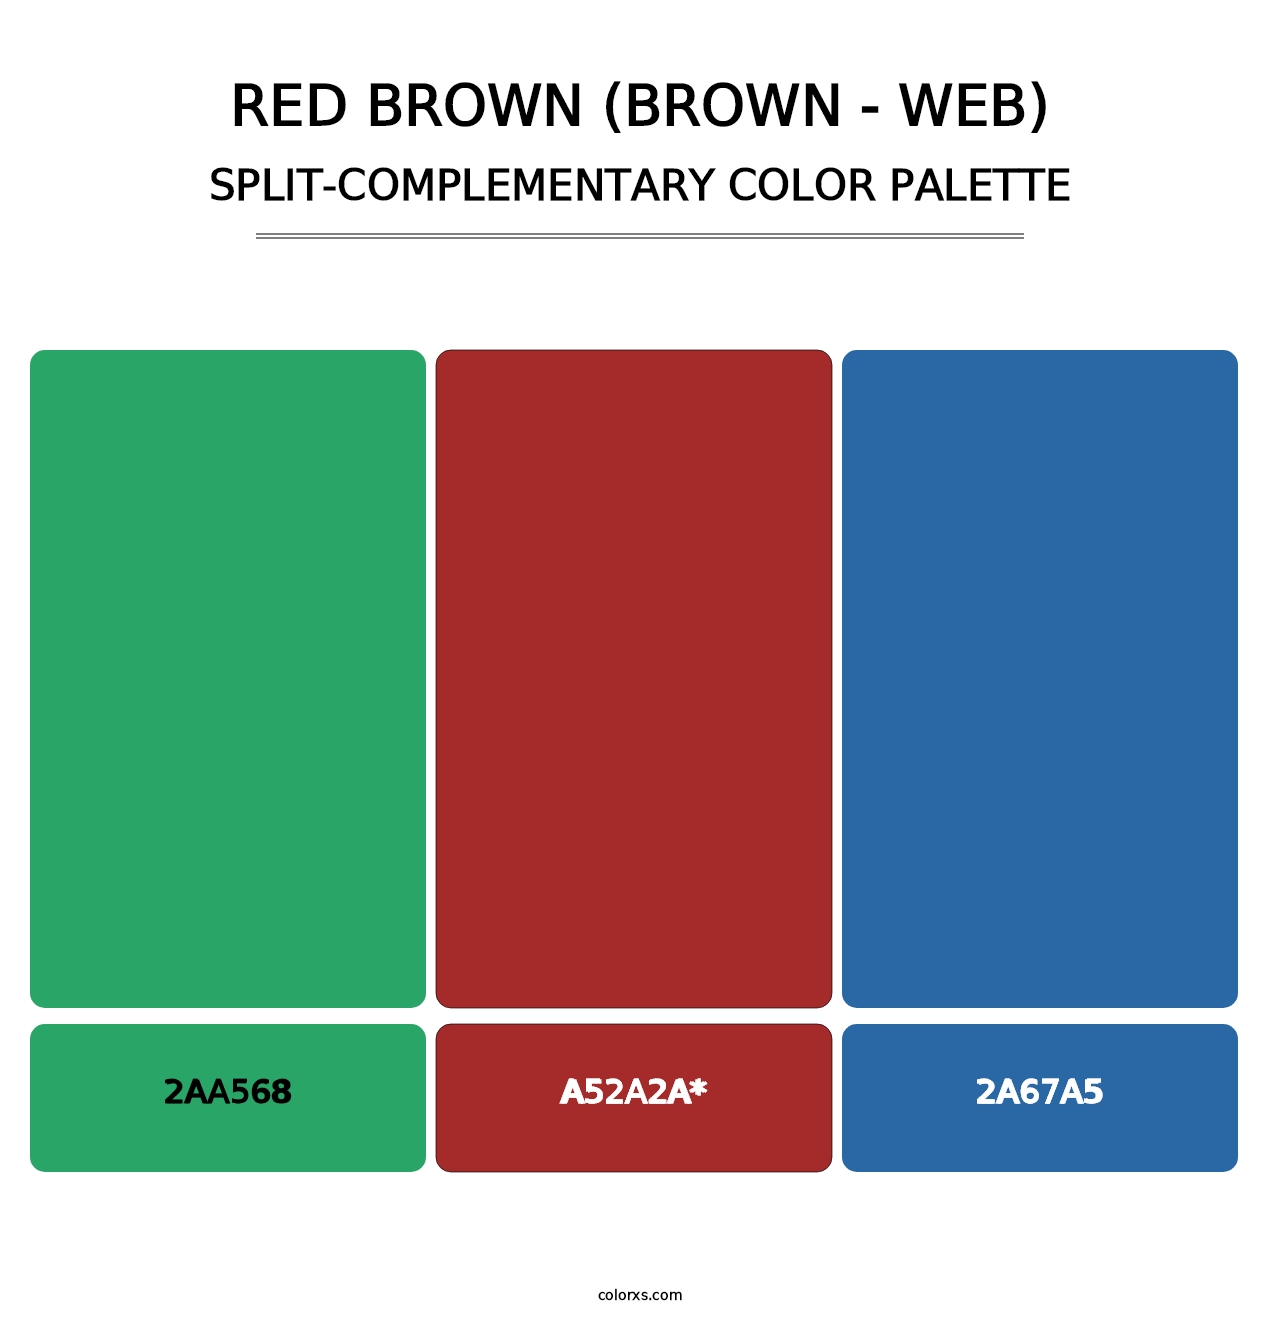 Red Brown (Brown - Web) - Split-Complementary Color Palette